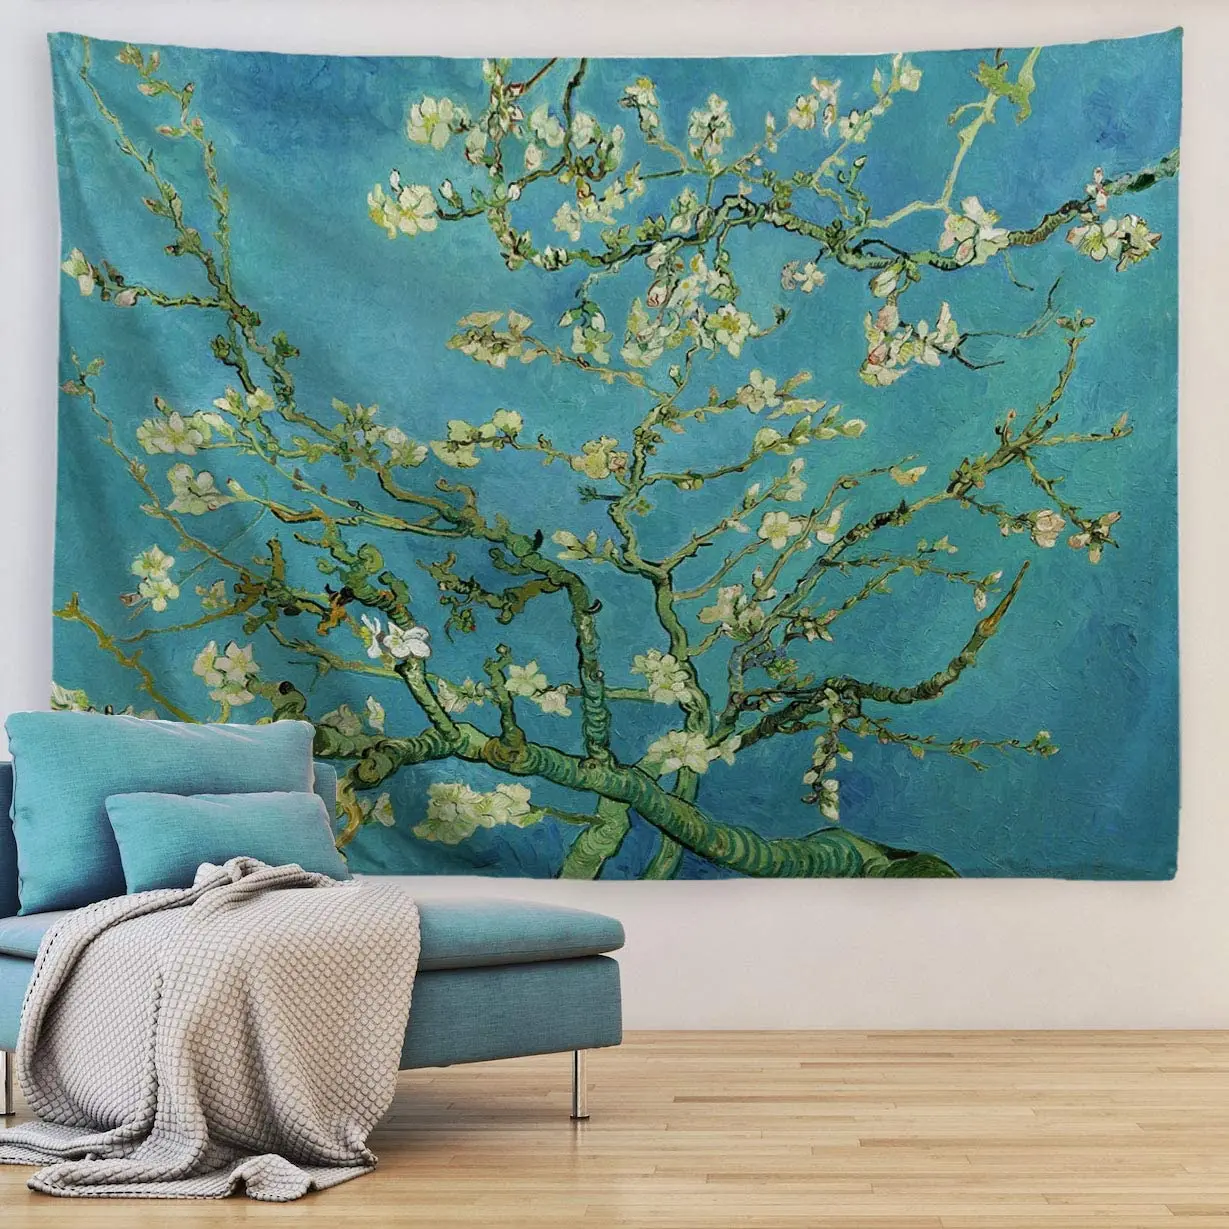 

Van Gogh Almond Blossom Tapestry Oil Painting Floral Wall Hanging Nature Landscape Art Home Decor for Bedroom Living Room